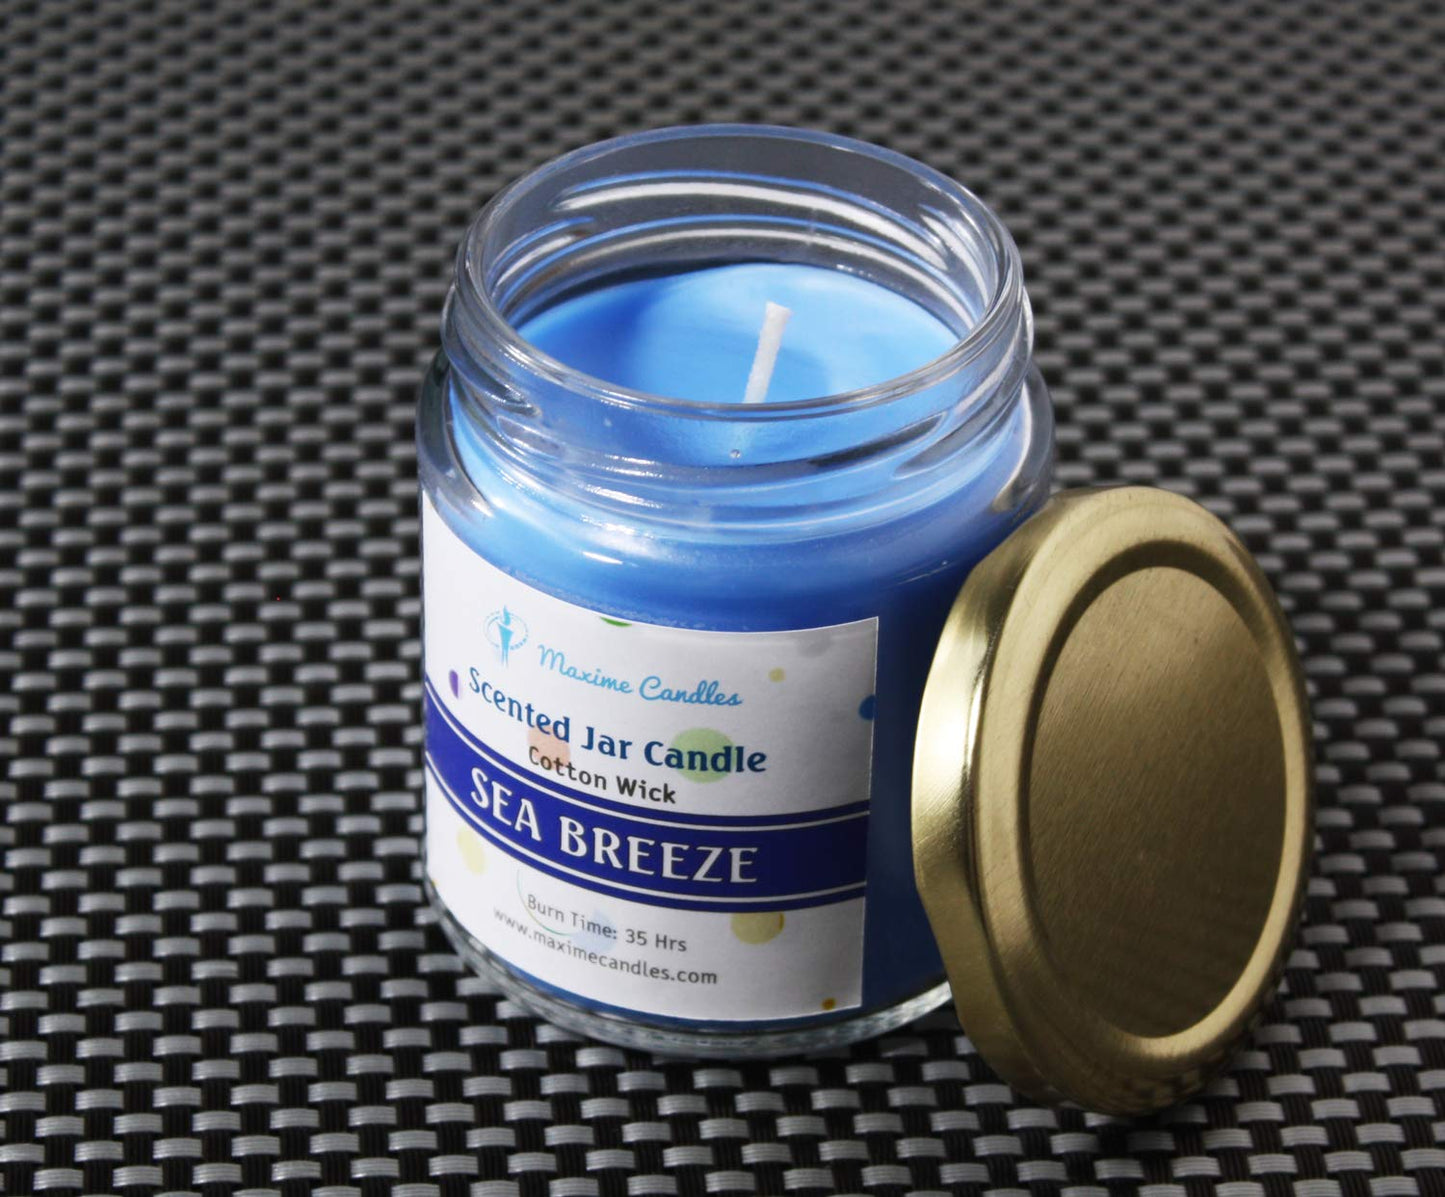 Seabreeze Fragranced Glass Jar Scented Candle